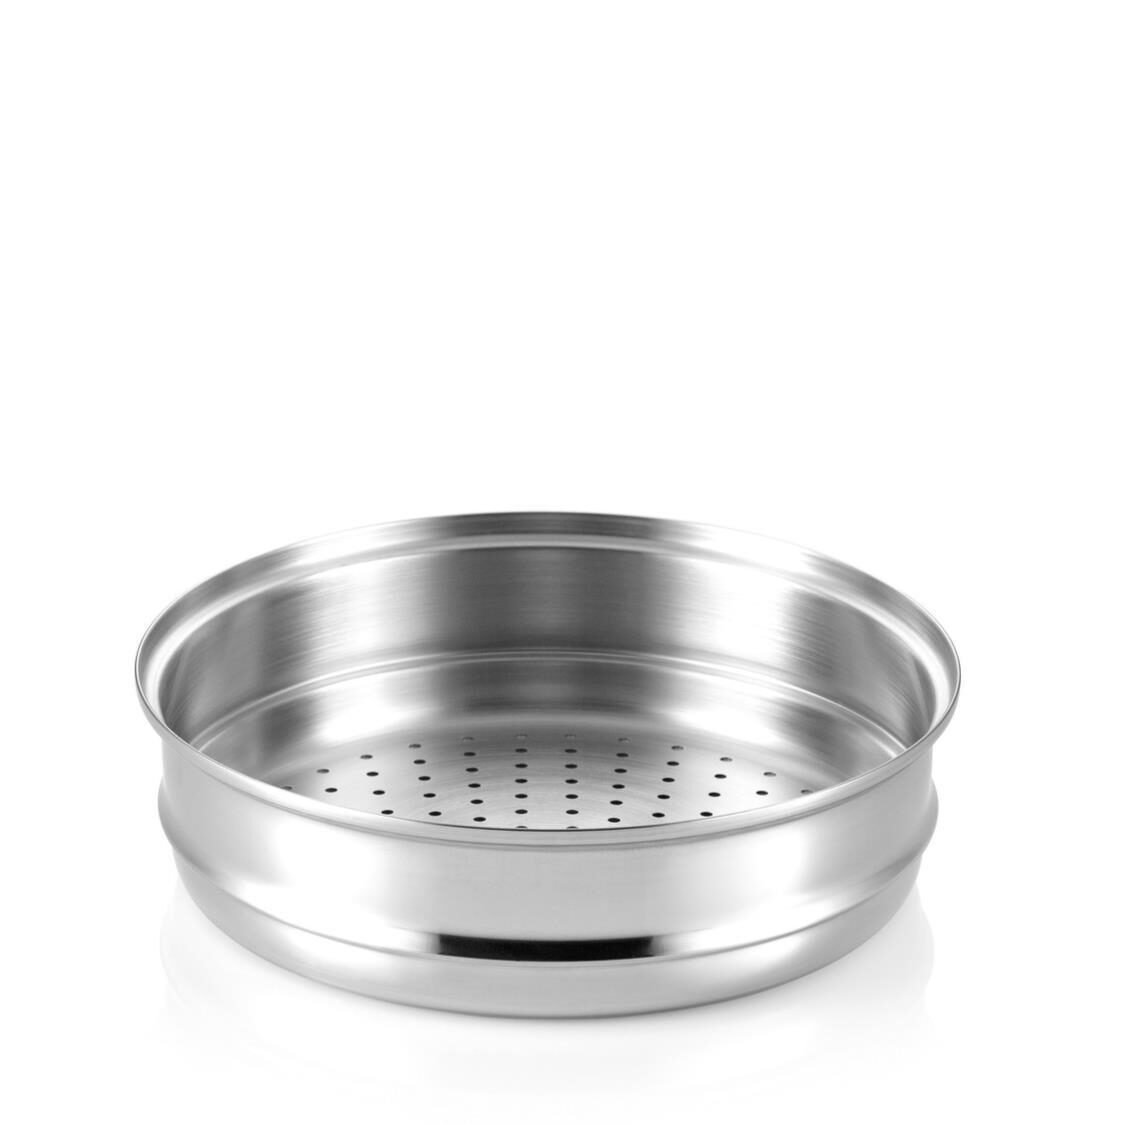 Happycall 24cm Stainless Steel Steamer 3800-1002